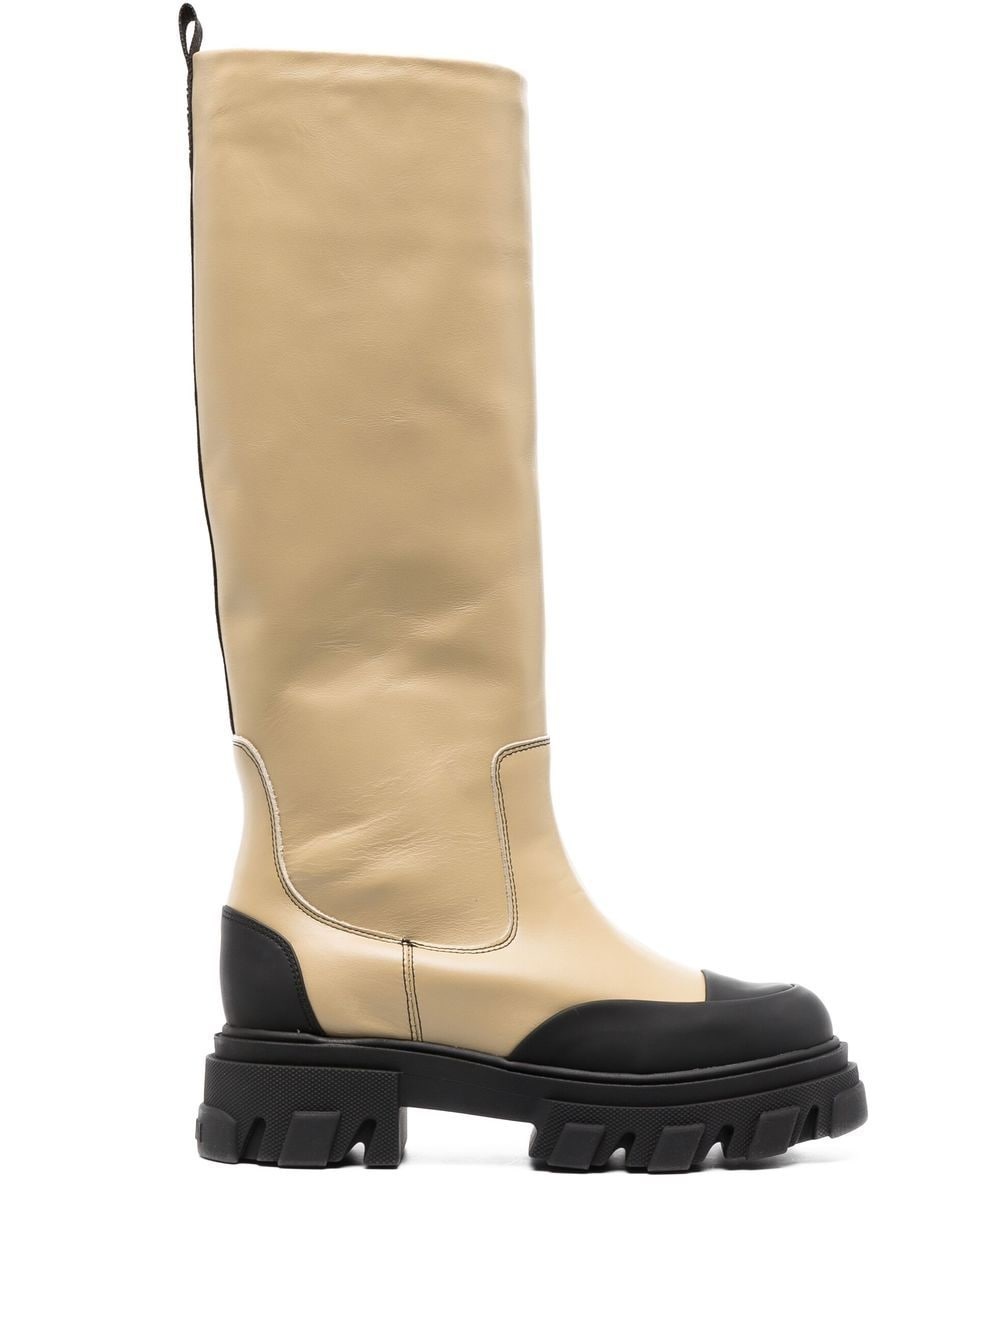 GANNI cleated tubular knee boots | REVERSIBLE